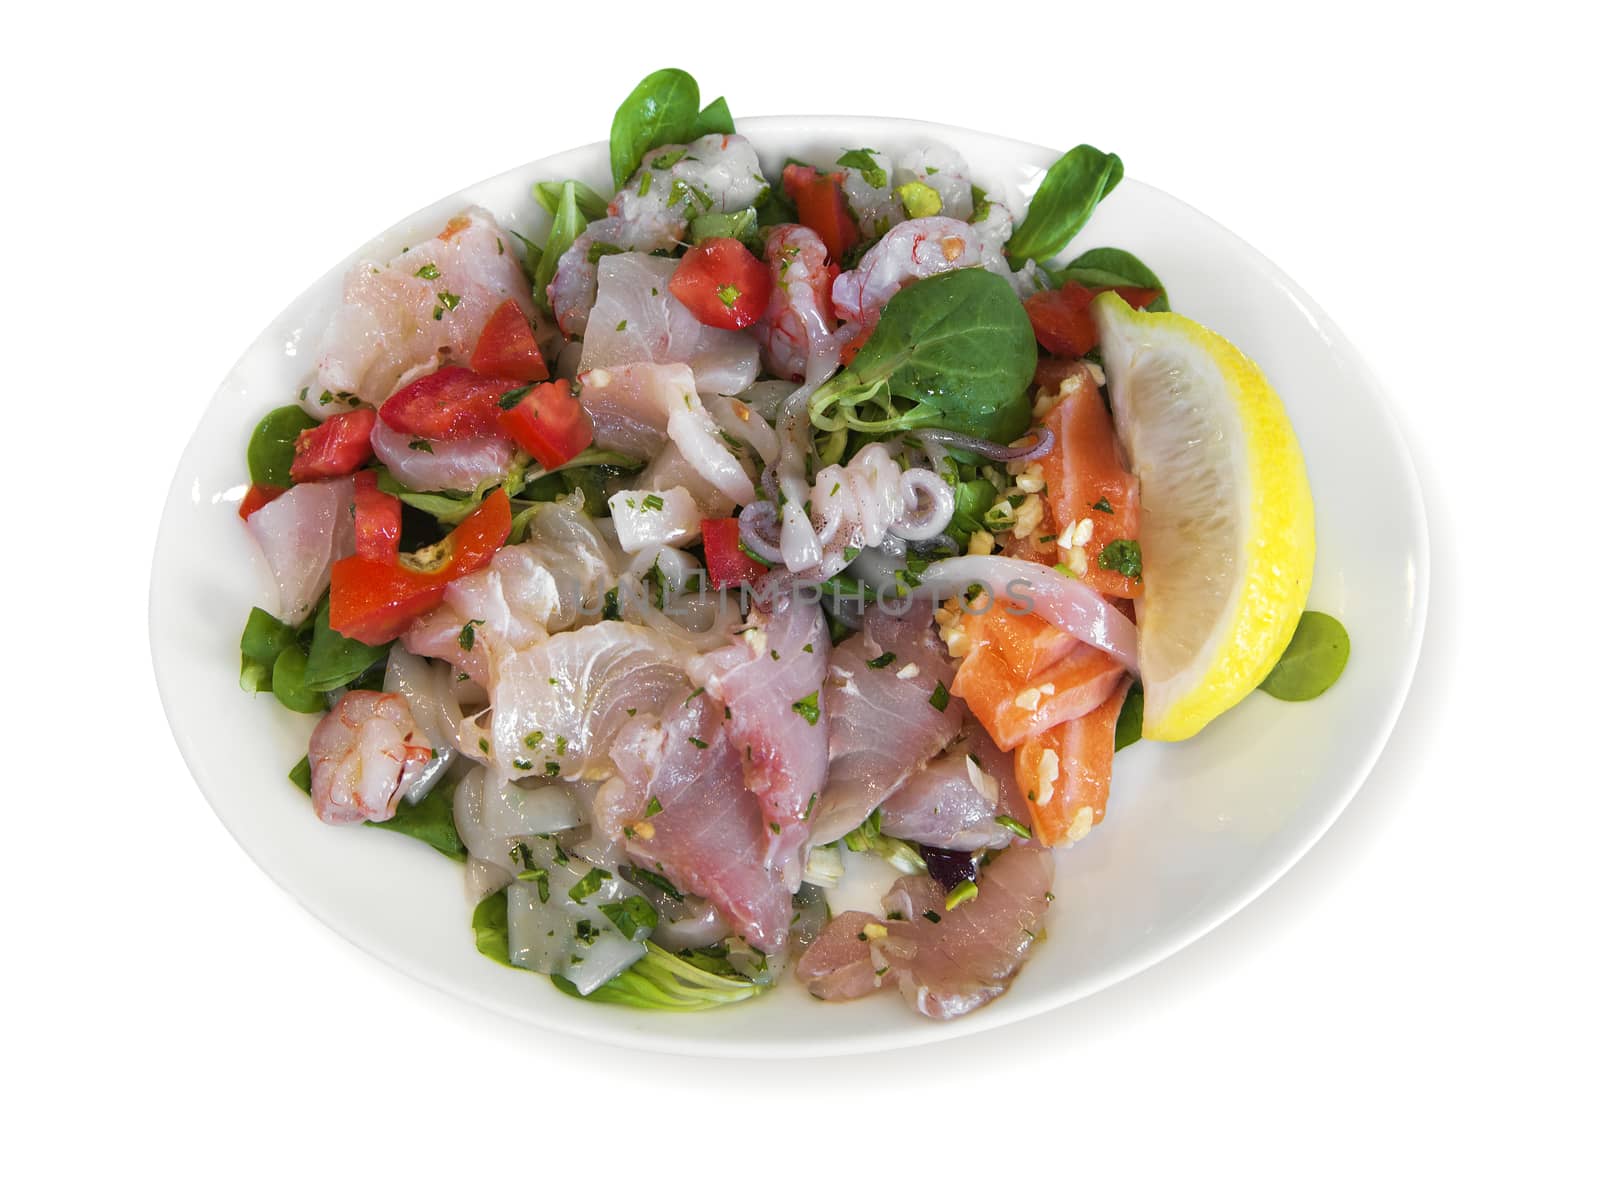 Ceviche - raw fish and seafood - marinated in lemon juice